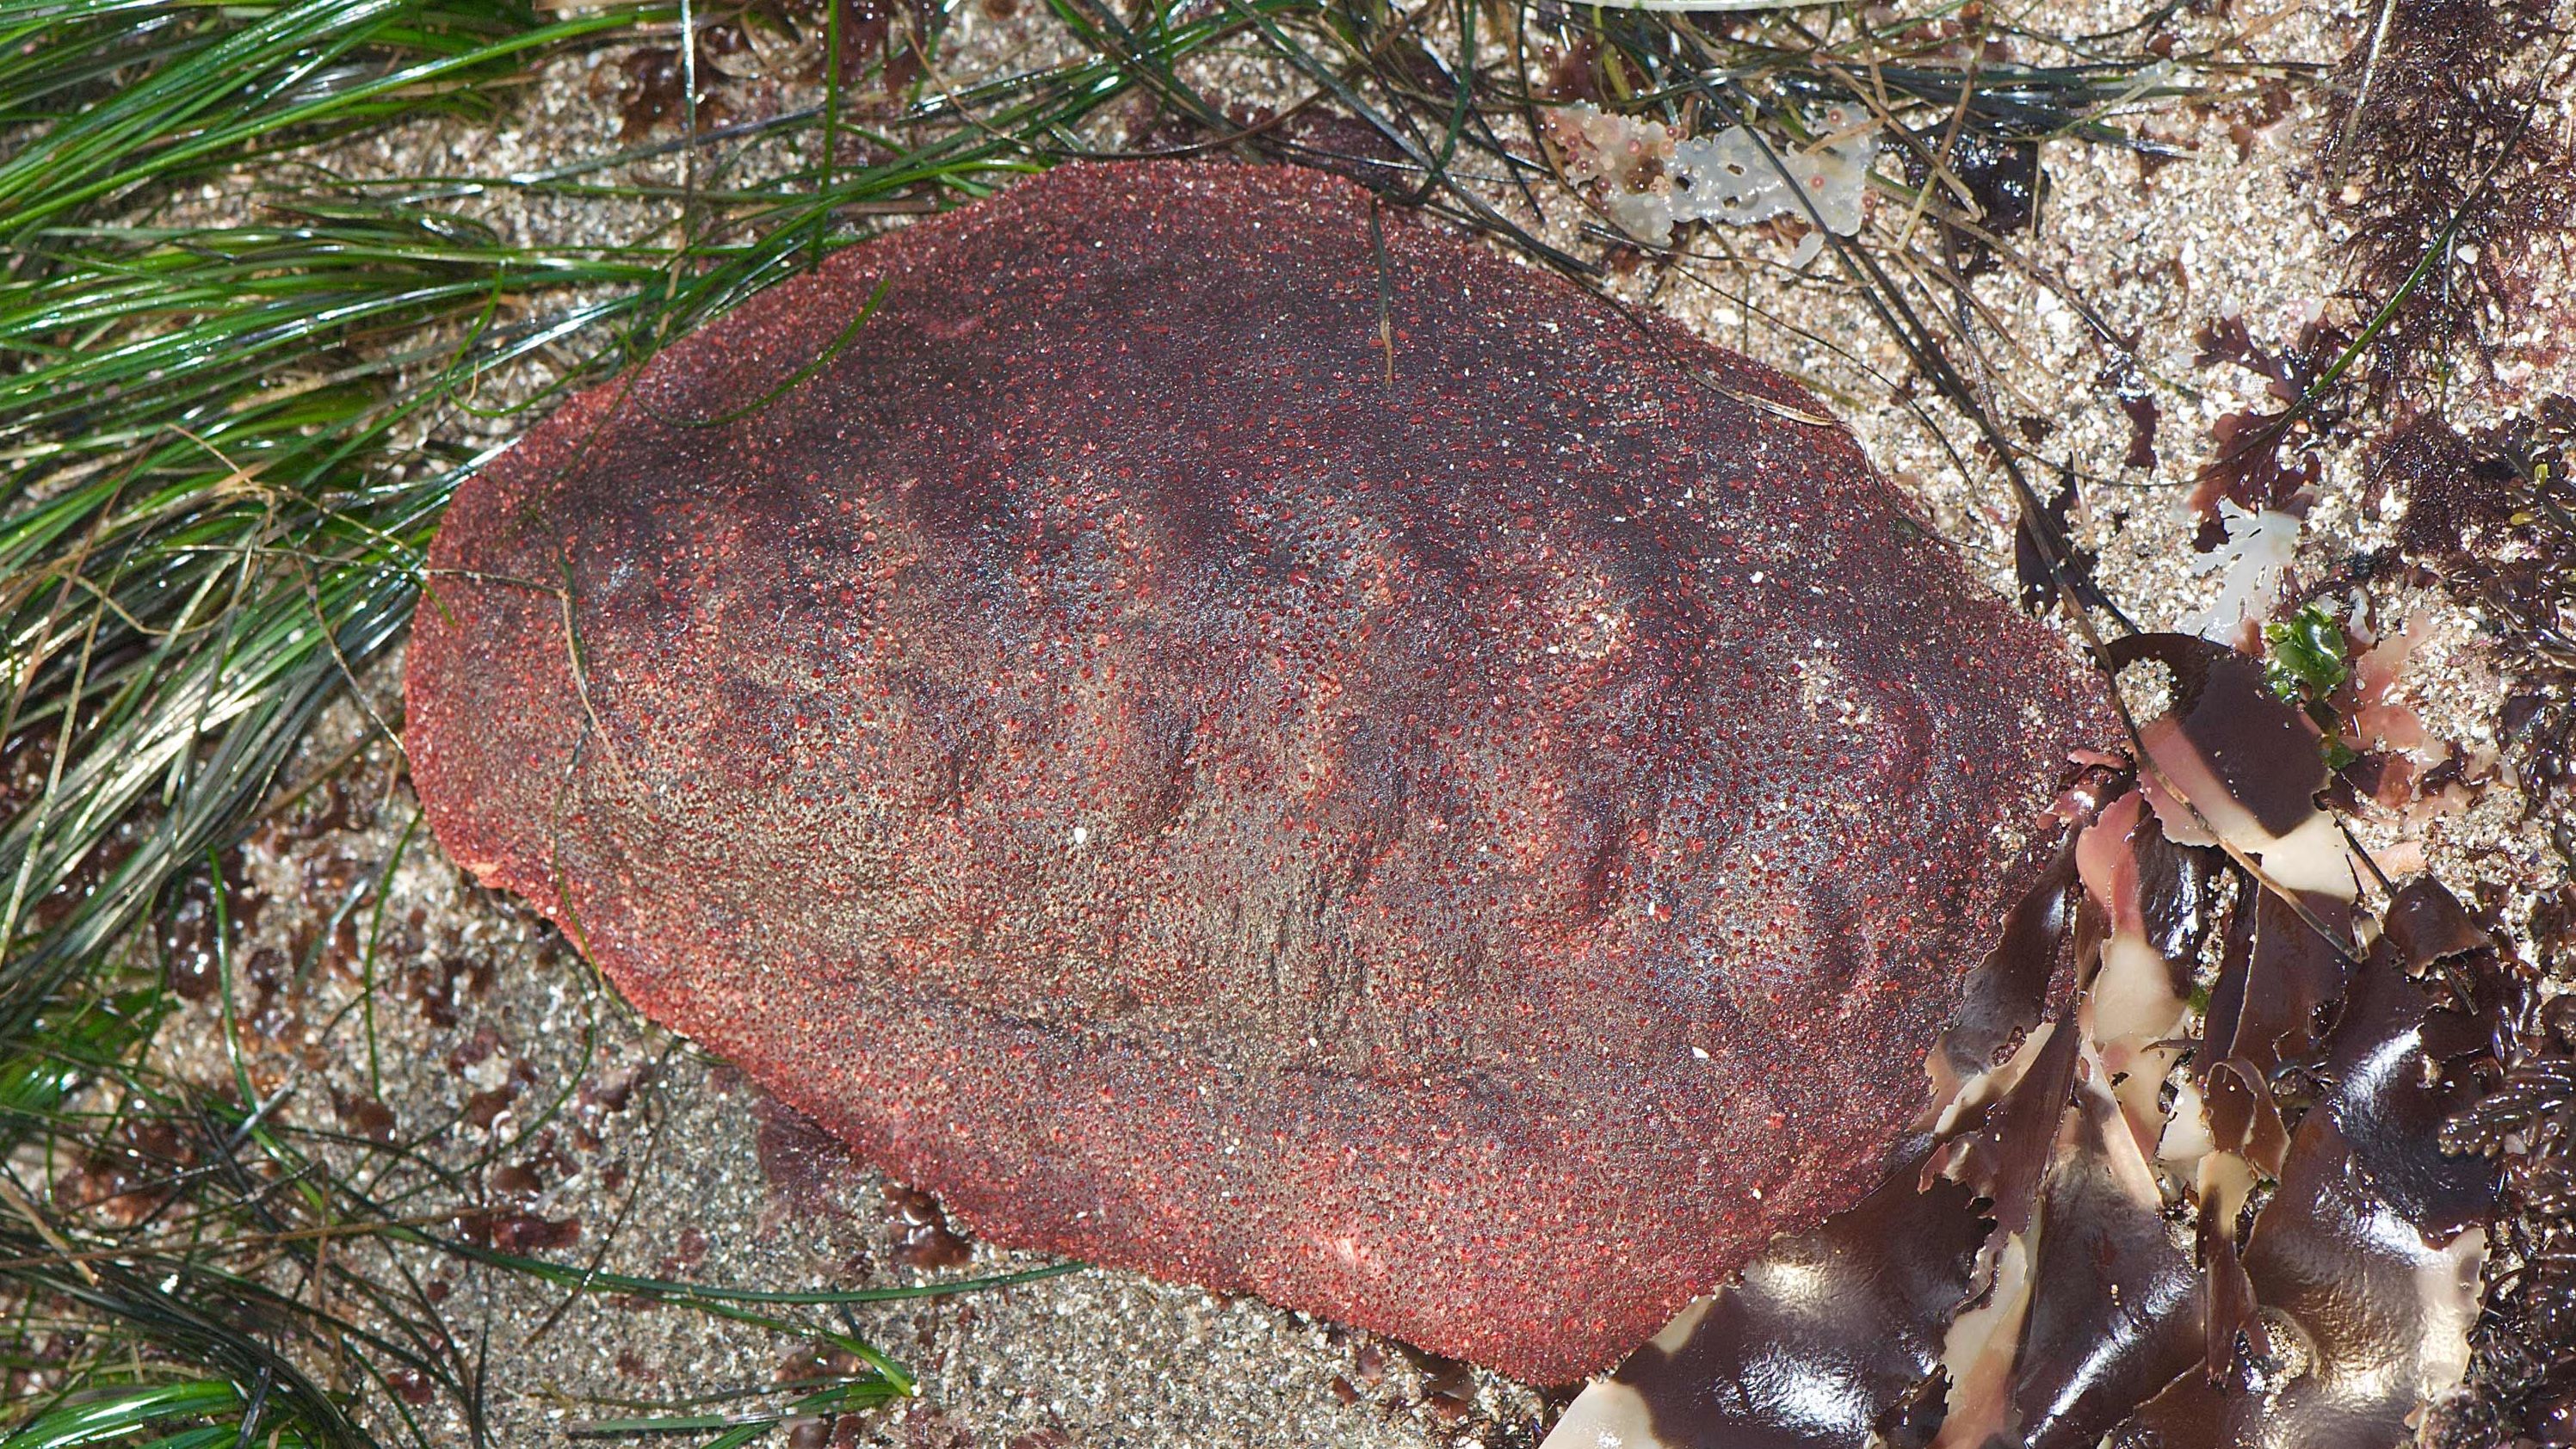 This particular type of mollusk called a chiton has been dubbed a "wandering meatloaf."